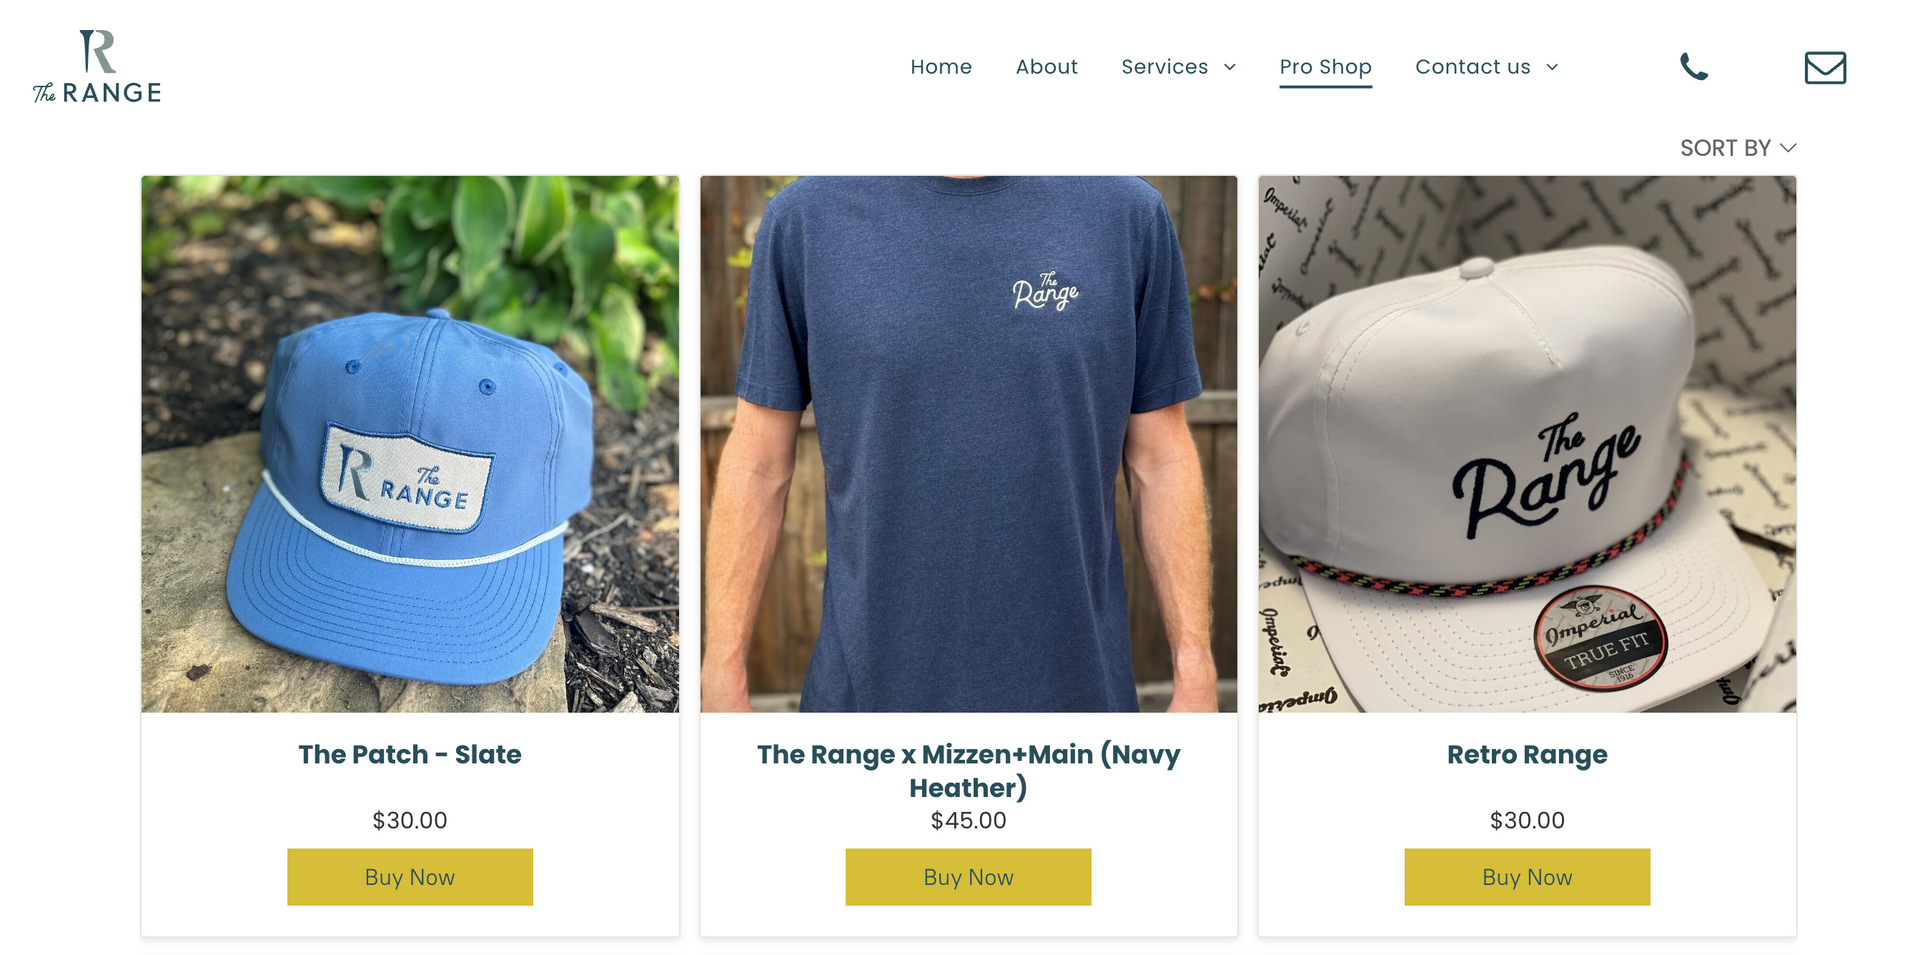 e-commerce shop from The Range Golf. A screenshot from their website shop that features hats and a shirt.